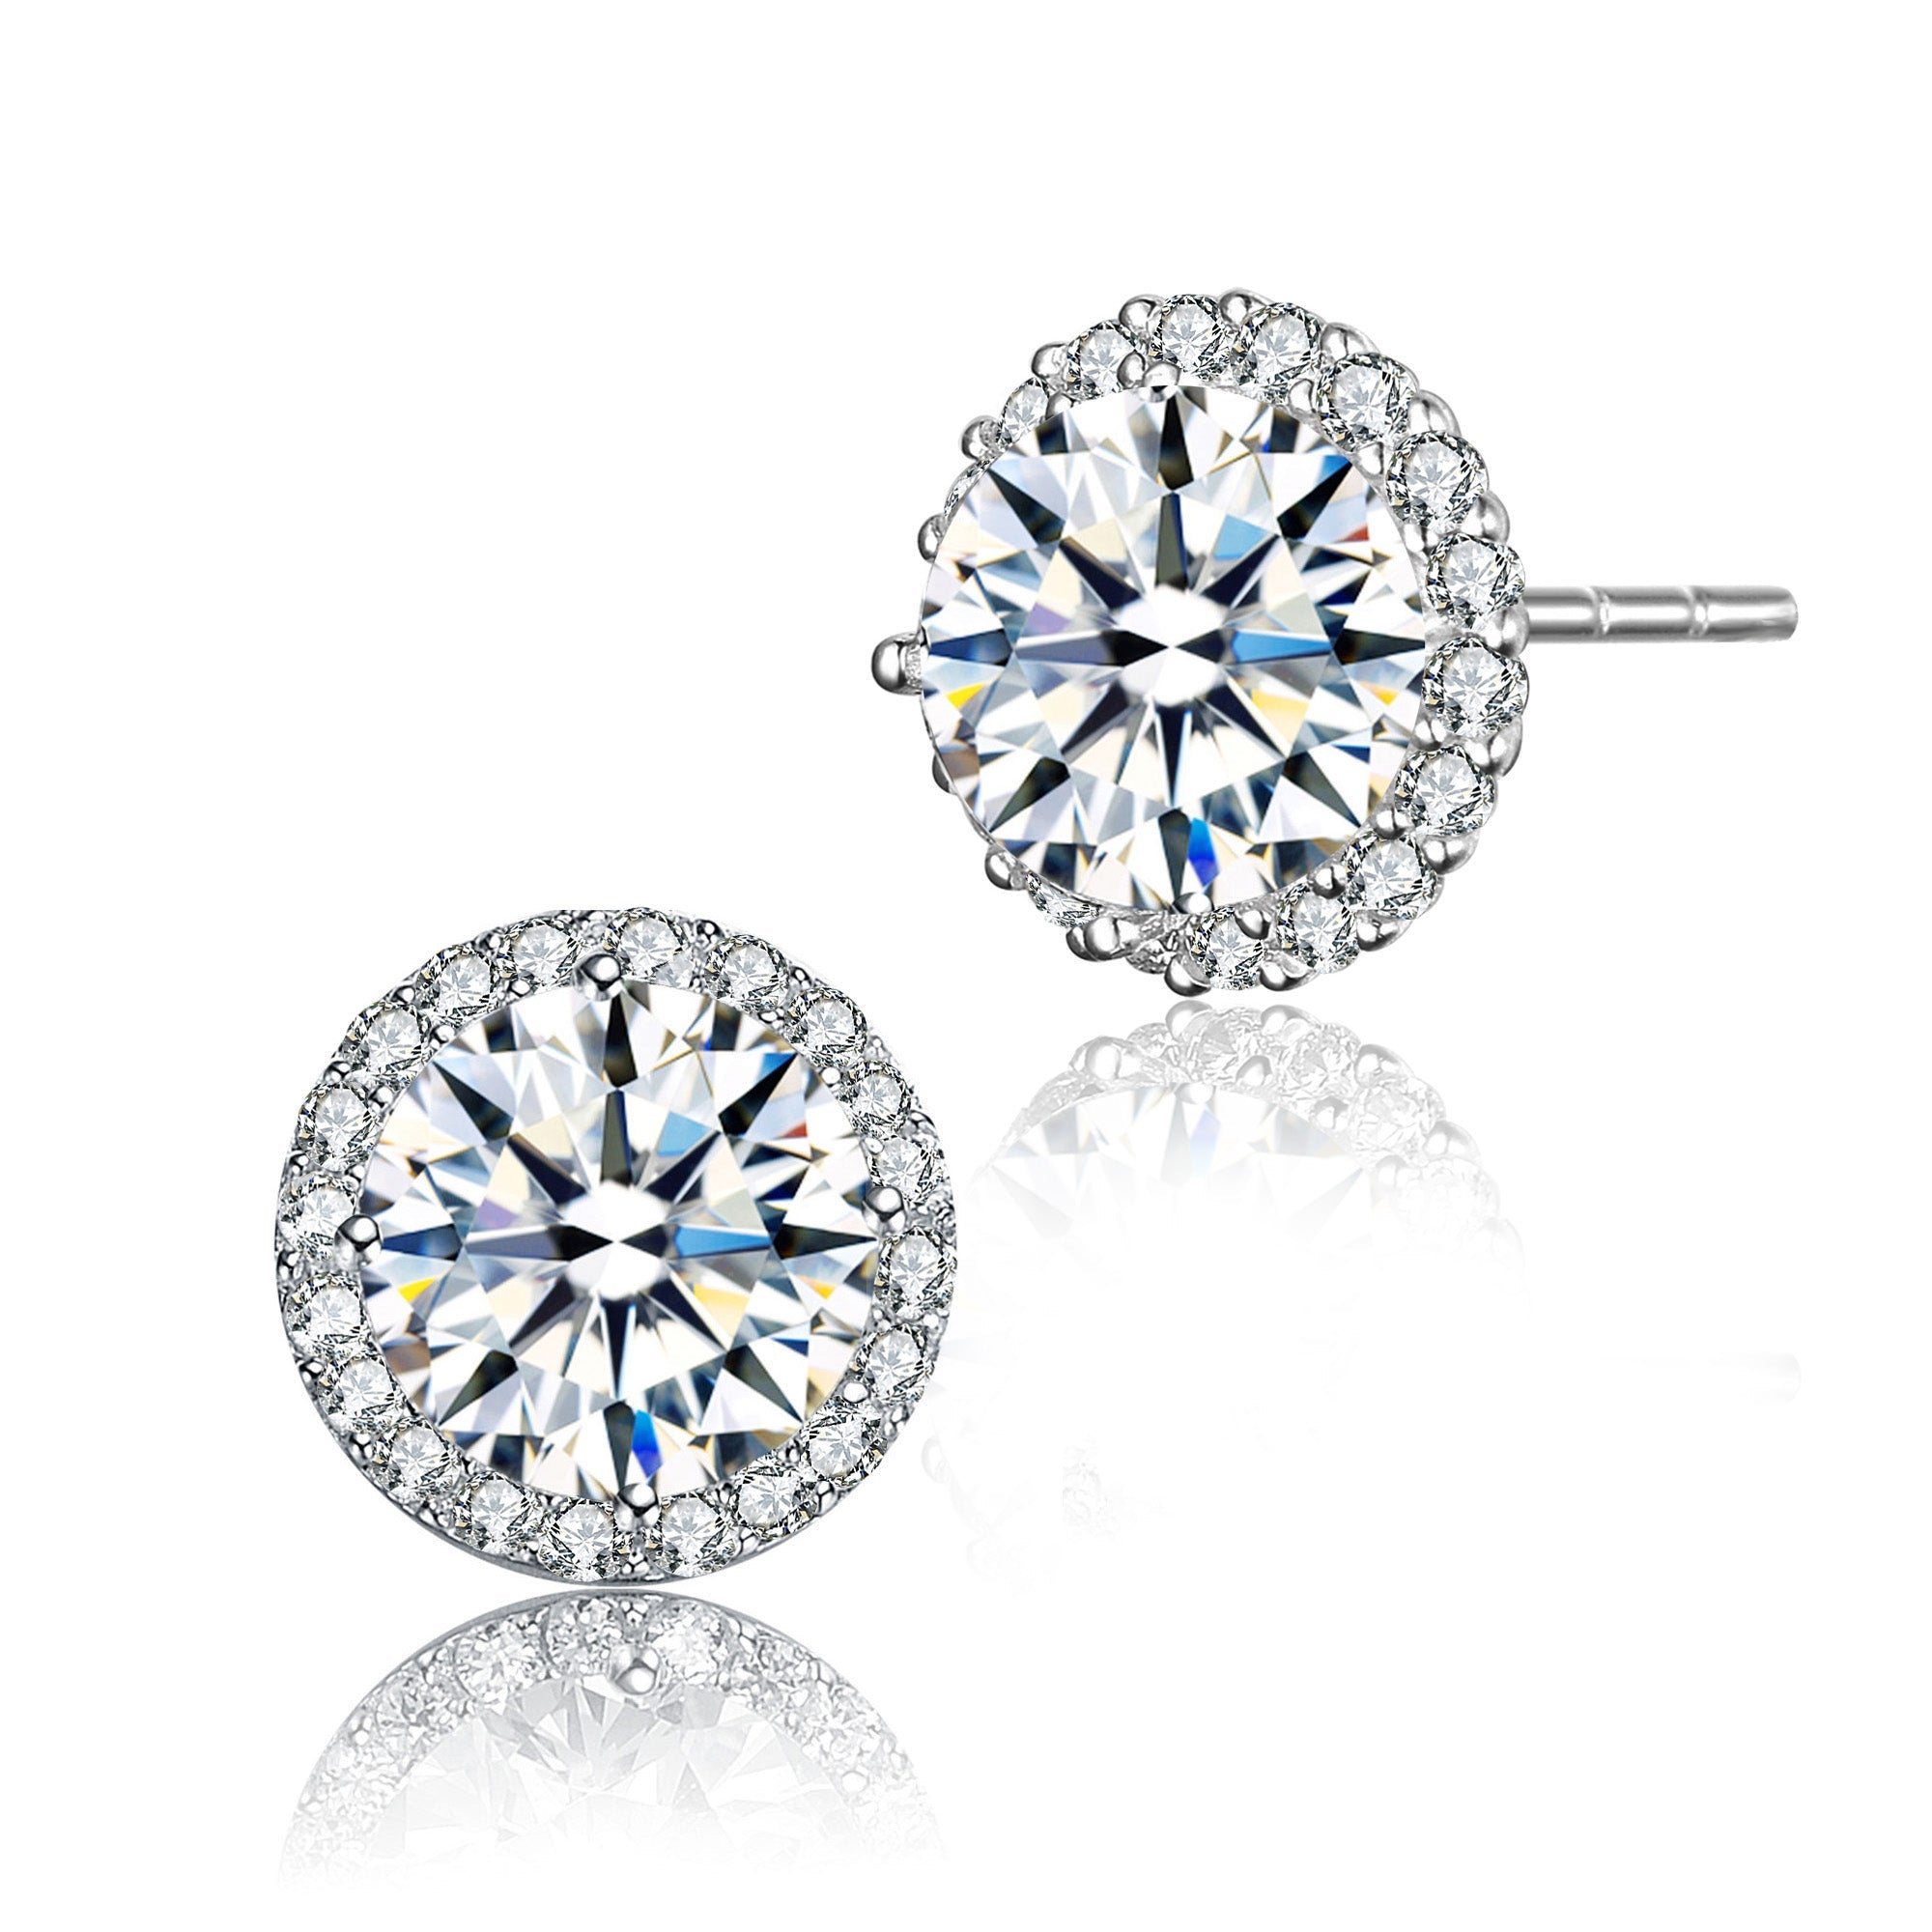 Sterling Silver with Rhodium Plated Clear Round Cubic Zirconia with Small Clear Round Cubic Zirconia Halo Accent Stud Earrings